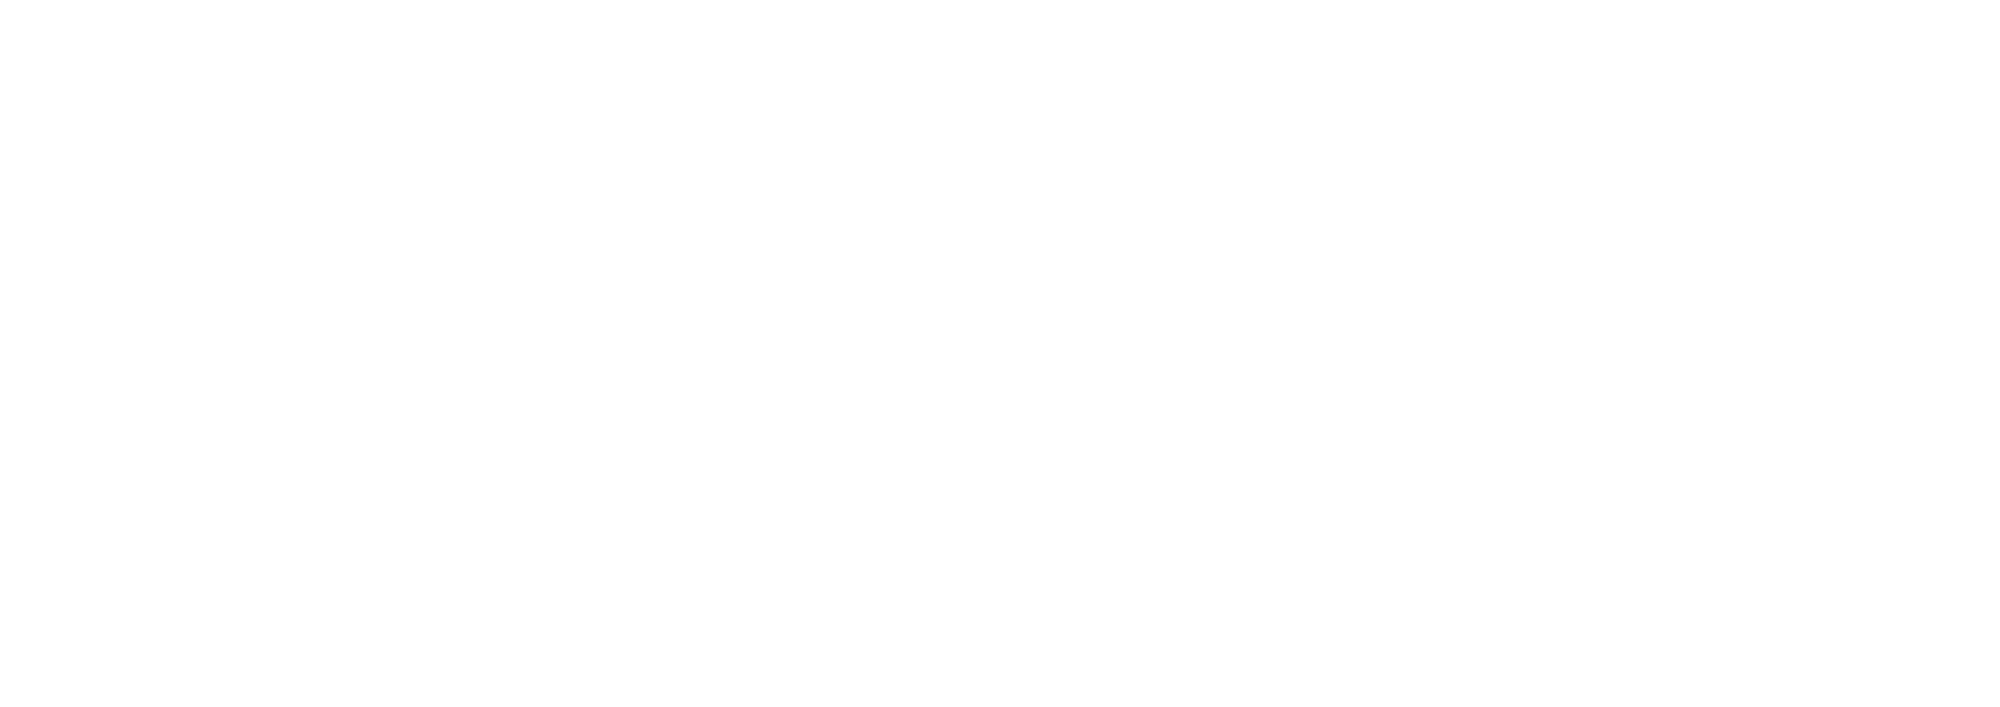 Employee Onboarding - Dos Donts Icon Pattern